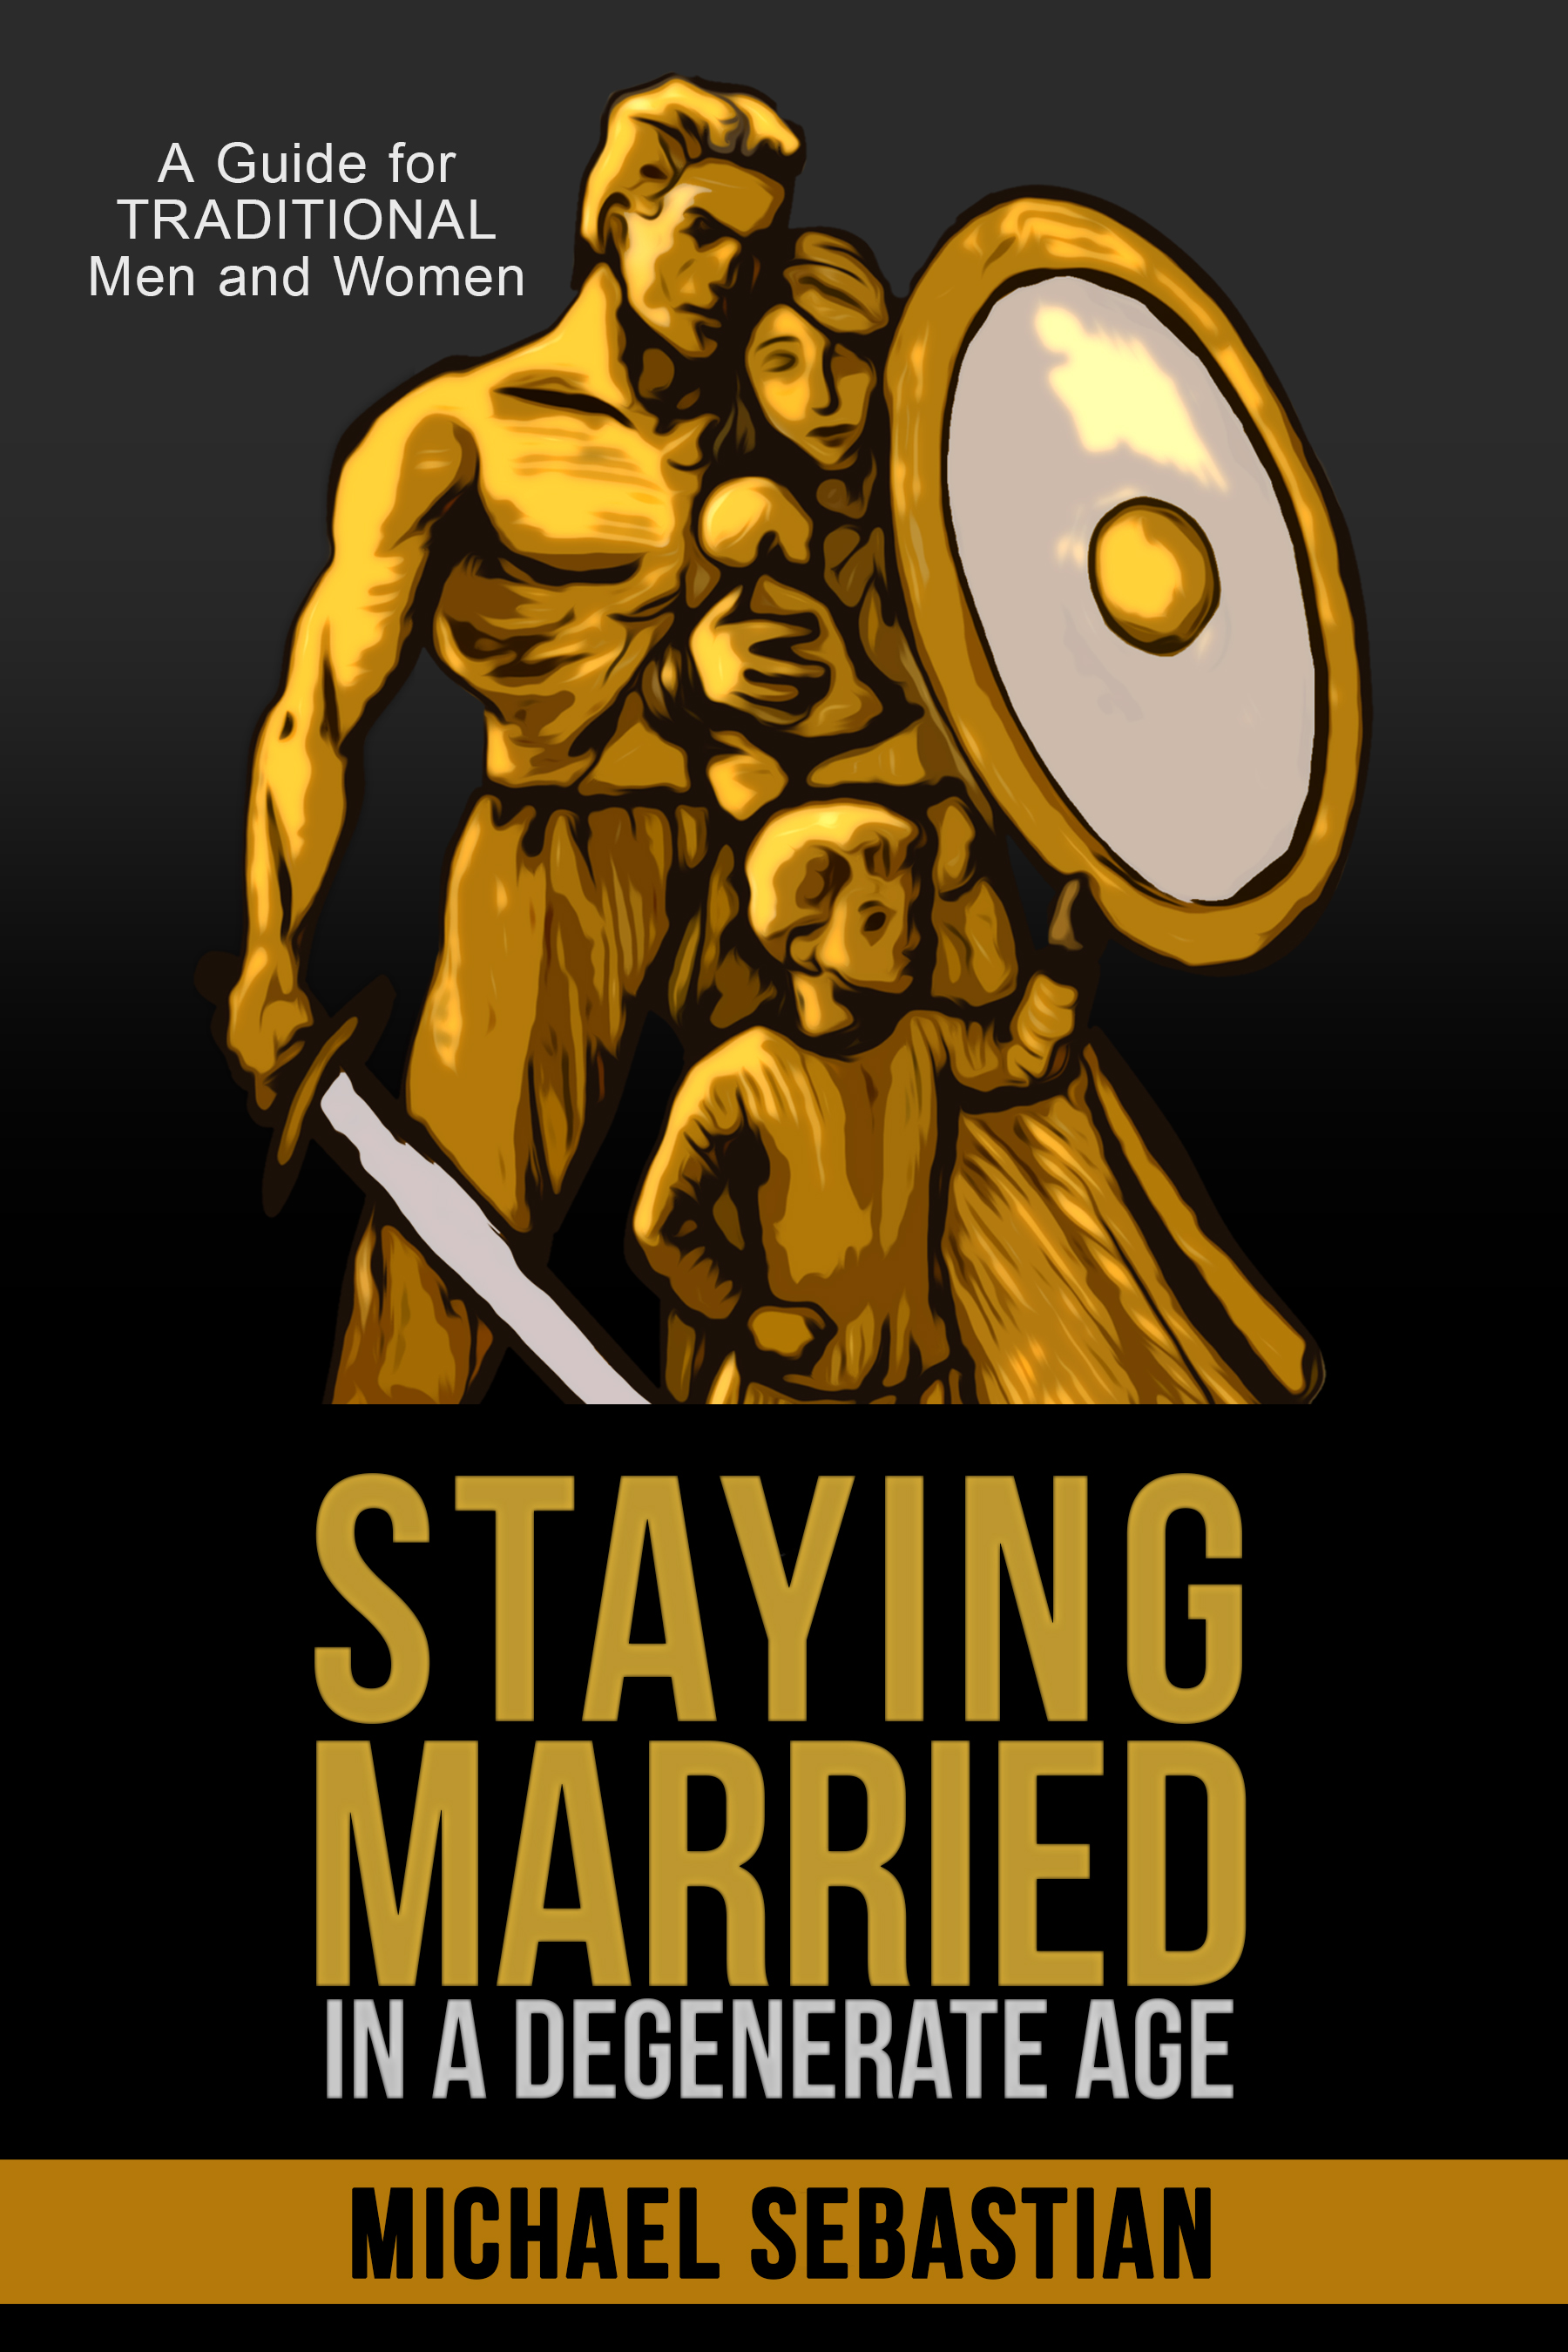 Staying Married in a Degenerate Age is Available & A Chance to Win a $100 Amazon Gift Card